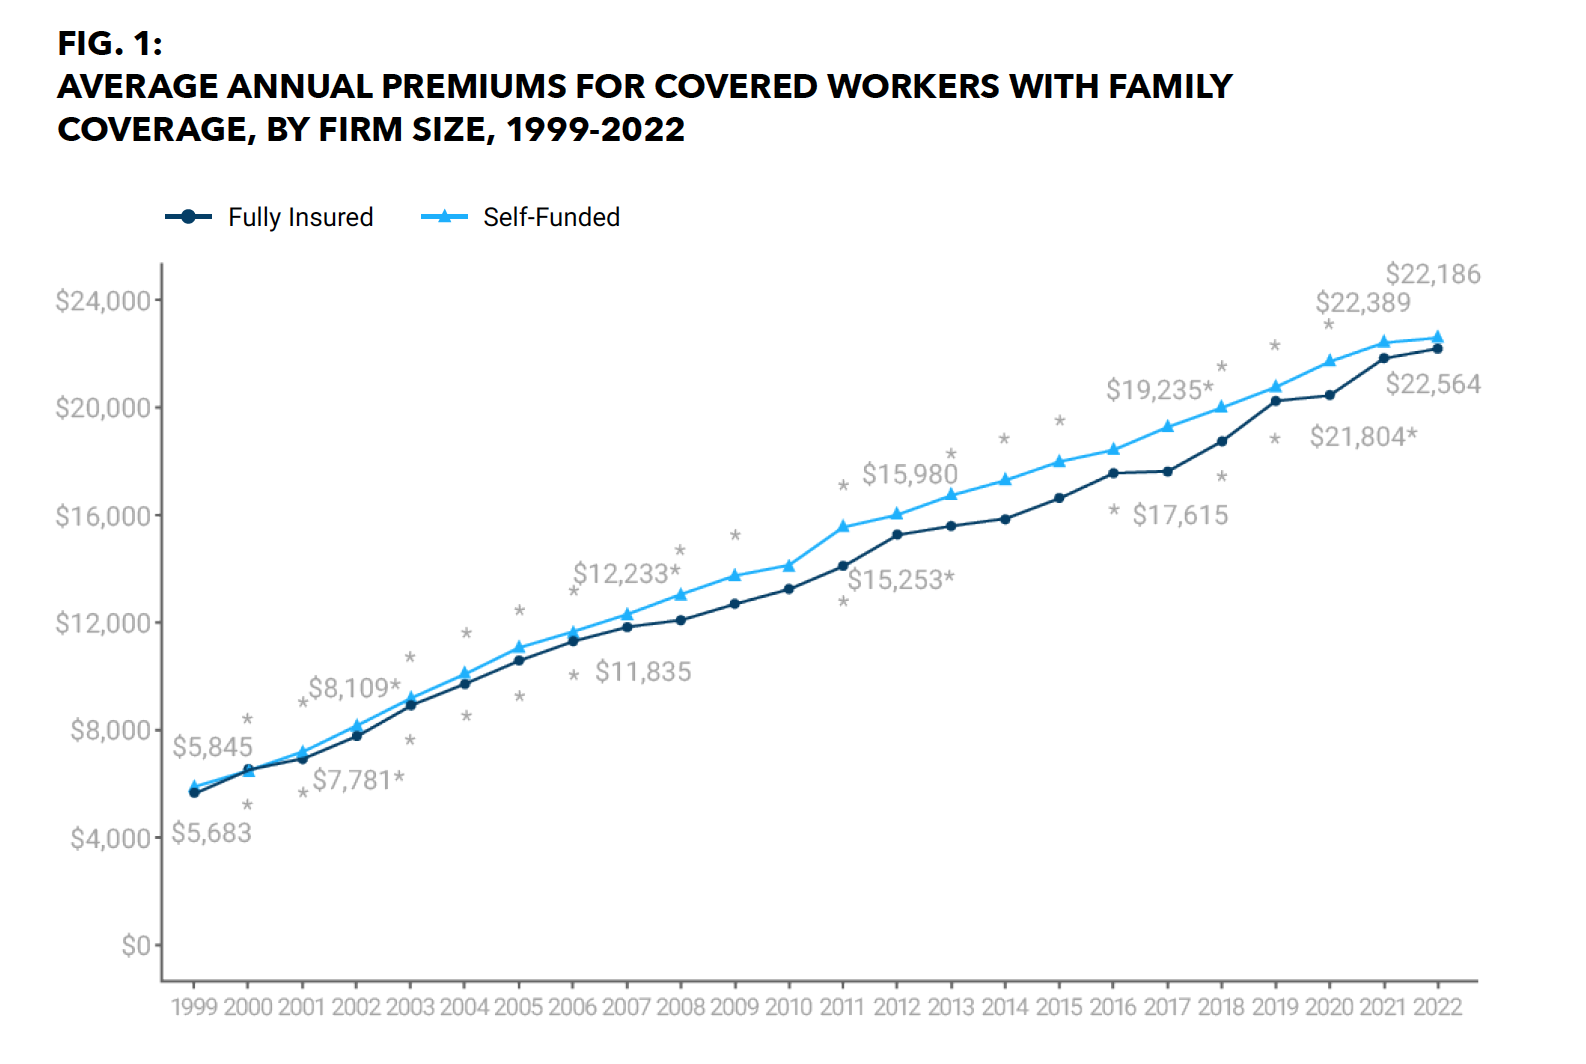 Average Annual Premiums for Covered Workers Graph 1999-2022